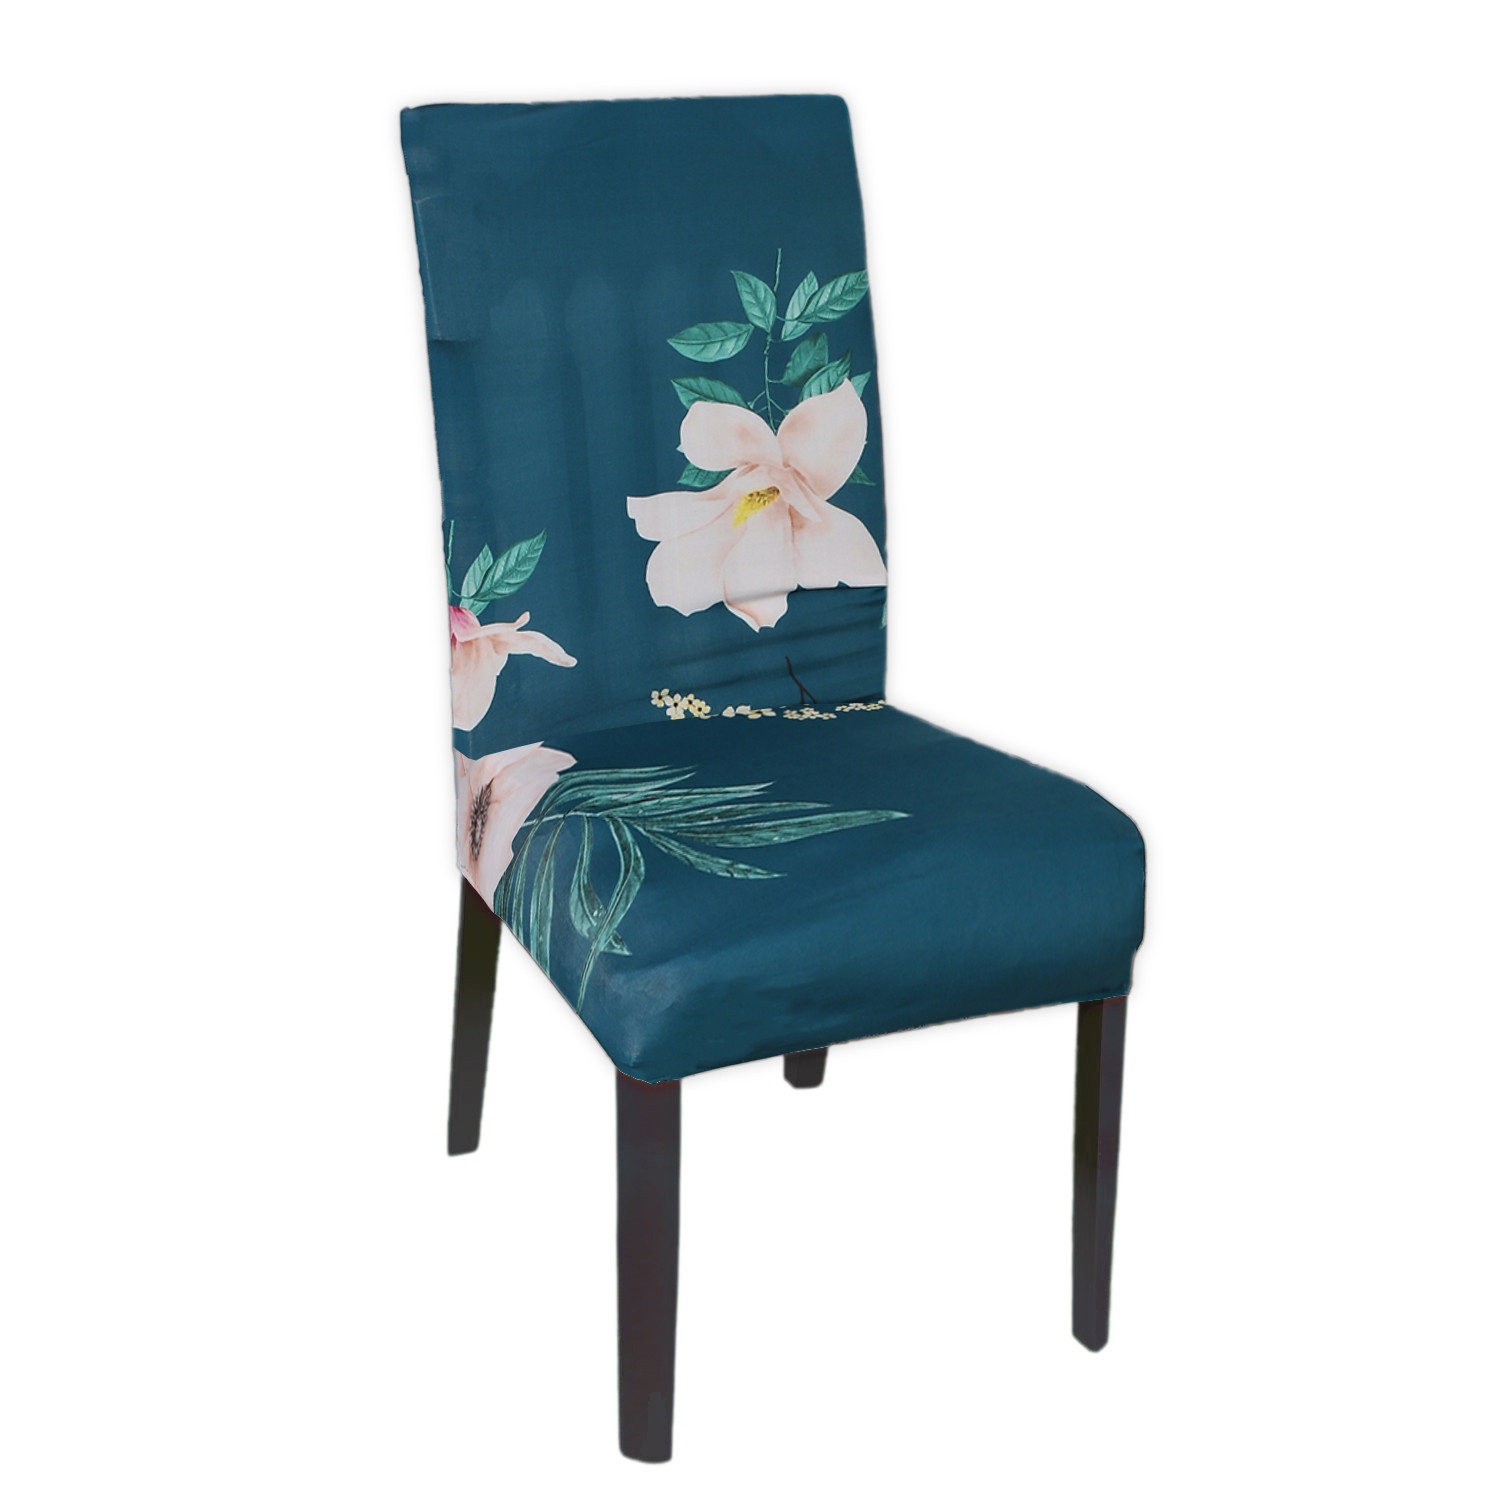 Kuber Industries Floral Print Elastic Stretchable Polyester Chair Cover For Home, Office, Hotels, Wedding Banquet (Green) 54KM4327